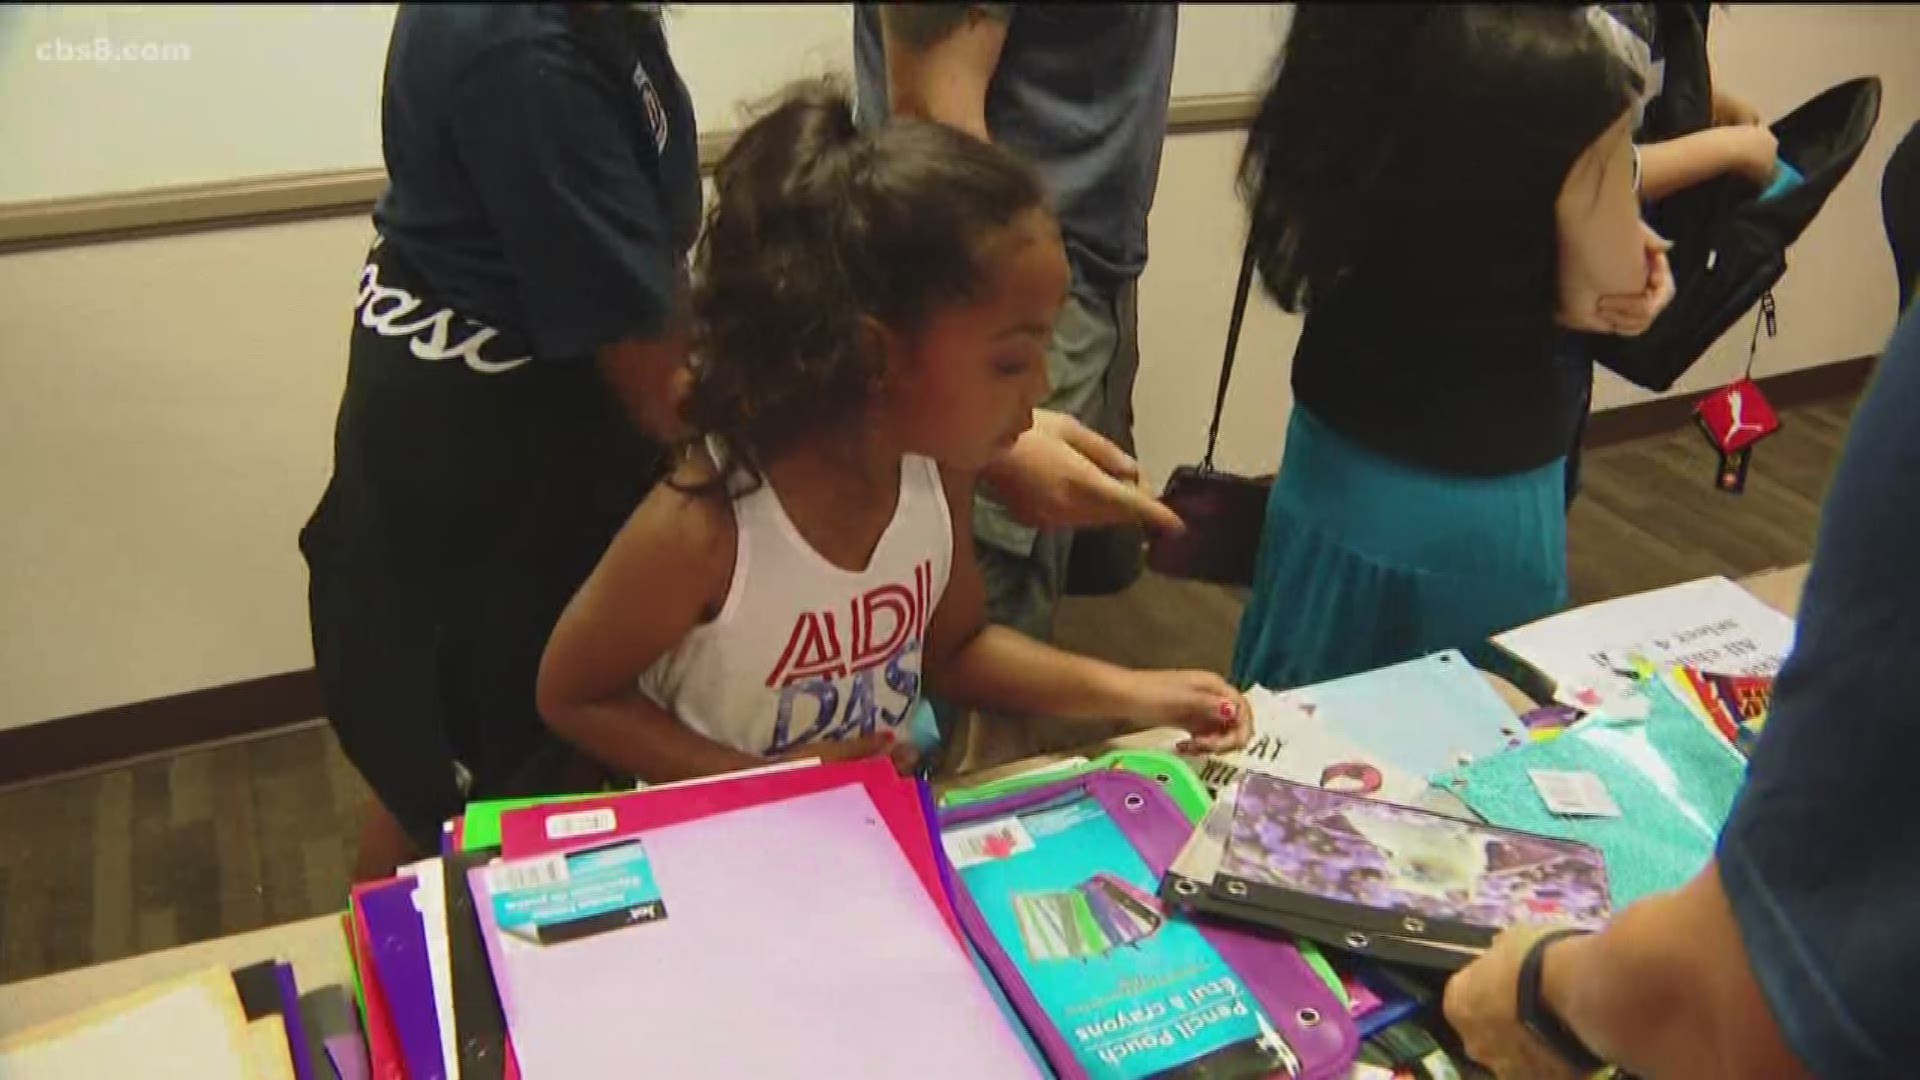 On Saturday Operation Homefront hosted its Back-to-School Brigade to give close to 500 children got their top pick of supplies.